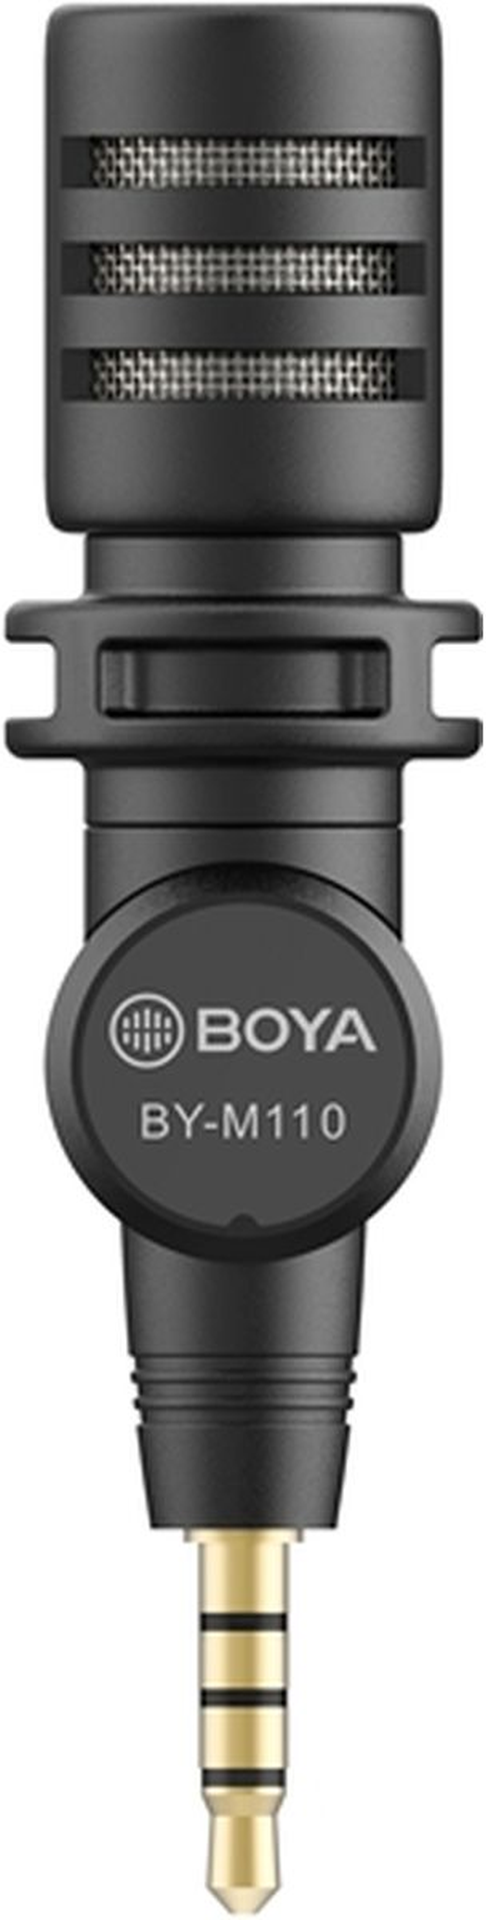 Boya BY-M110 Omni Directional Microphone 3.5mm TRRS